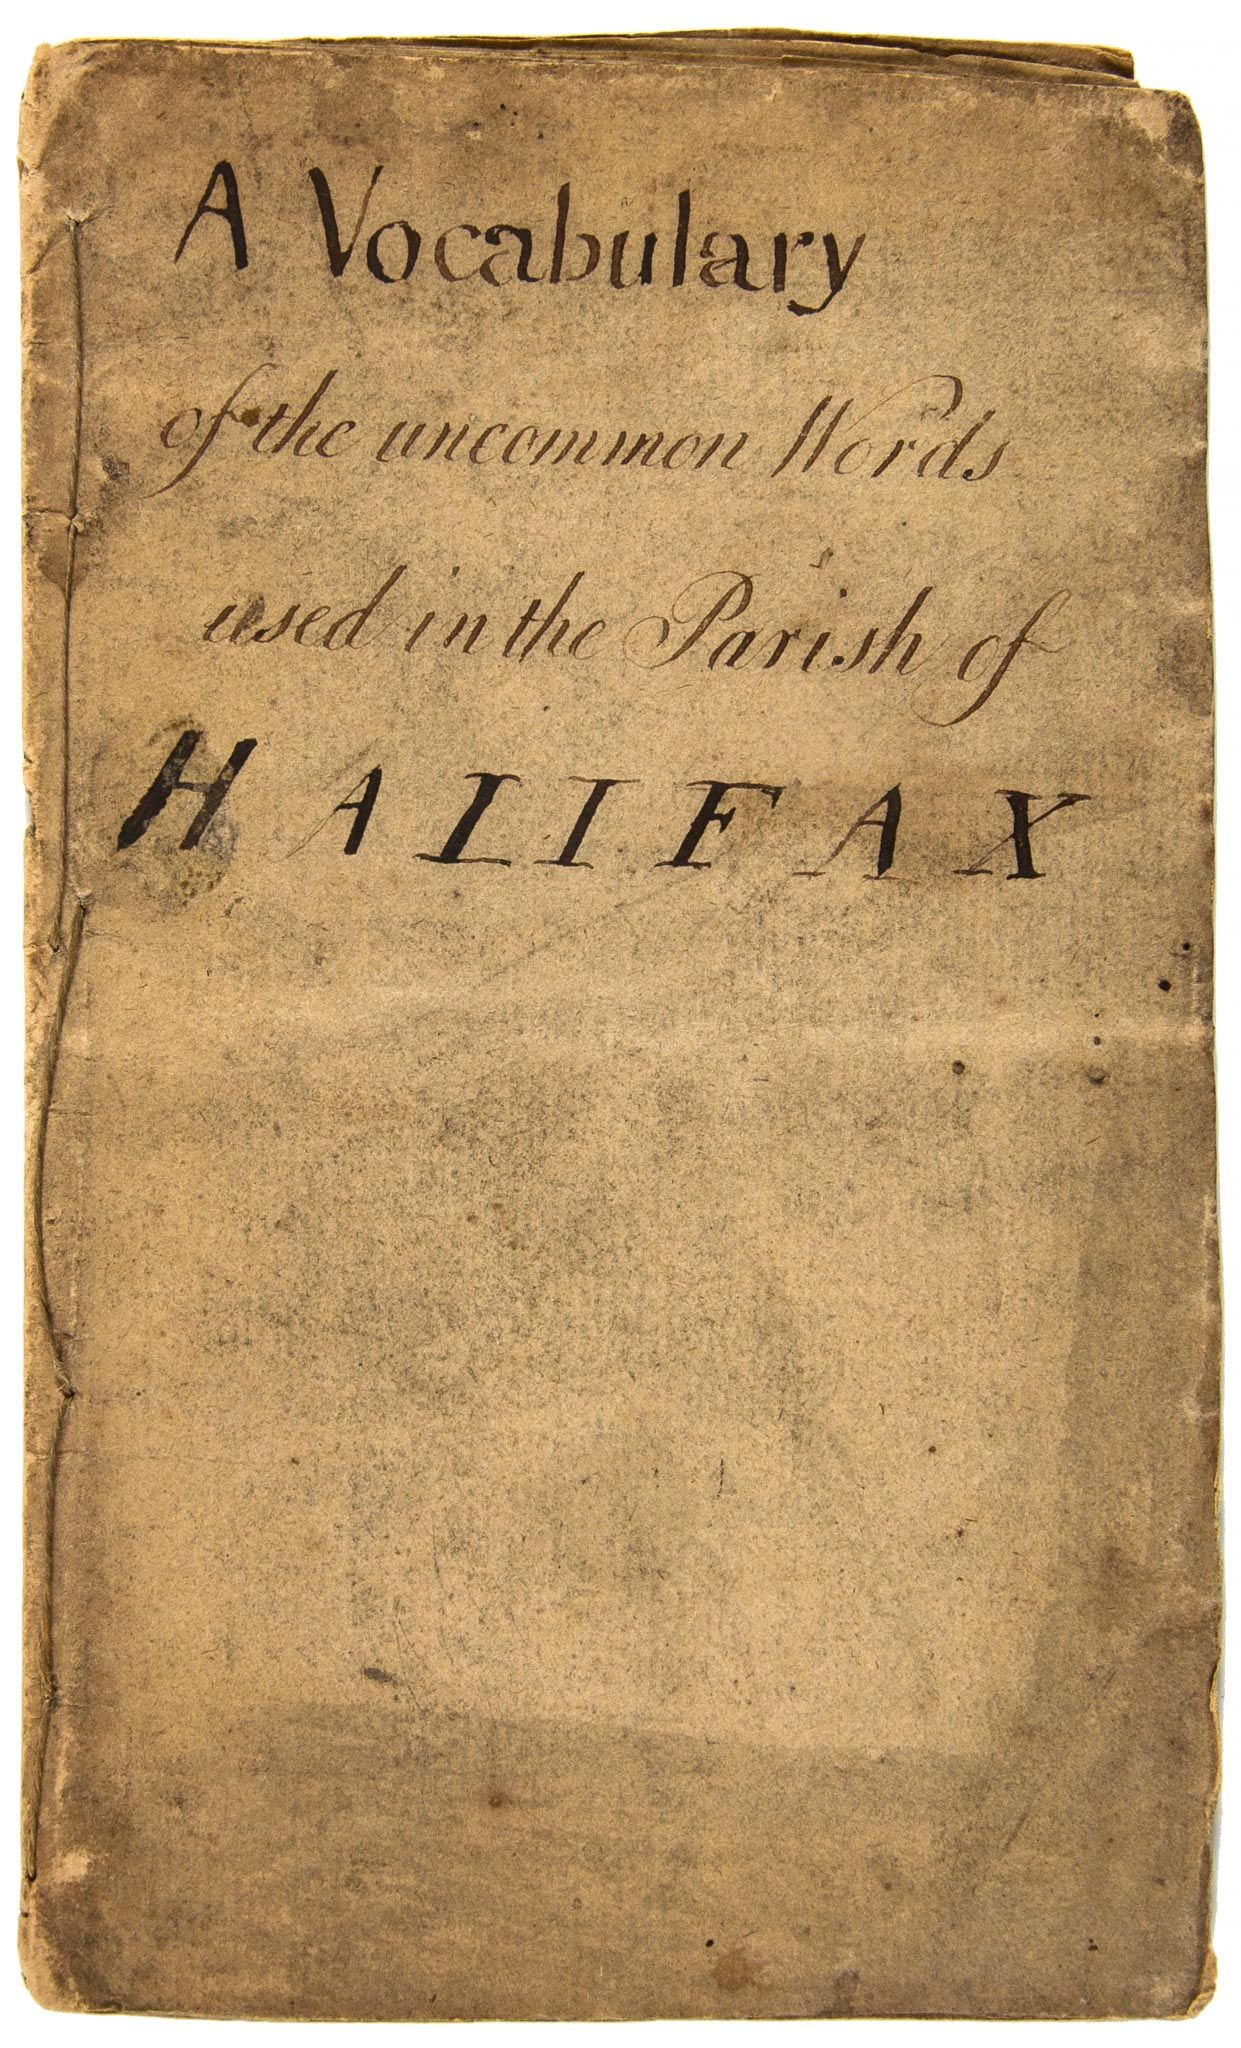 A Vocabulary of the uncommon Words used in the parish of Halifax 1789 A Vocabulary of the uncommon